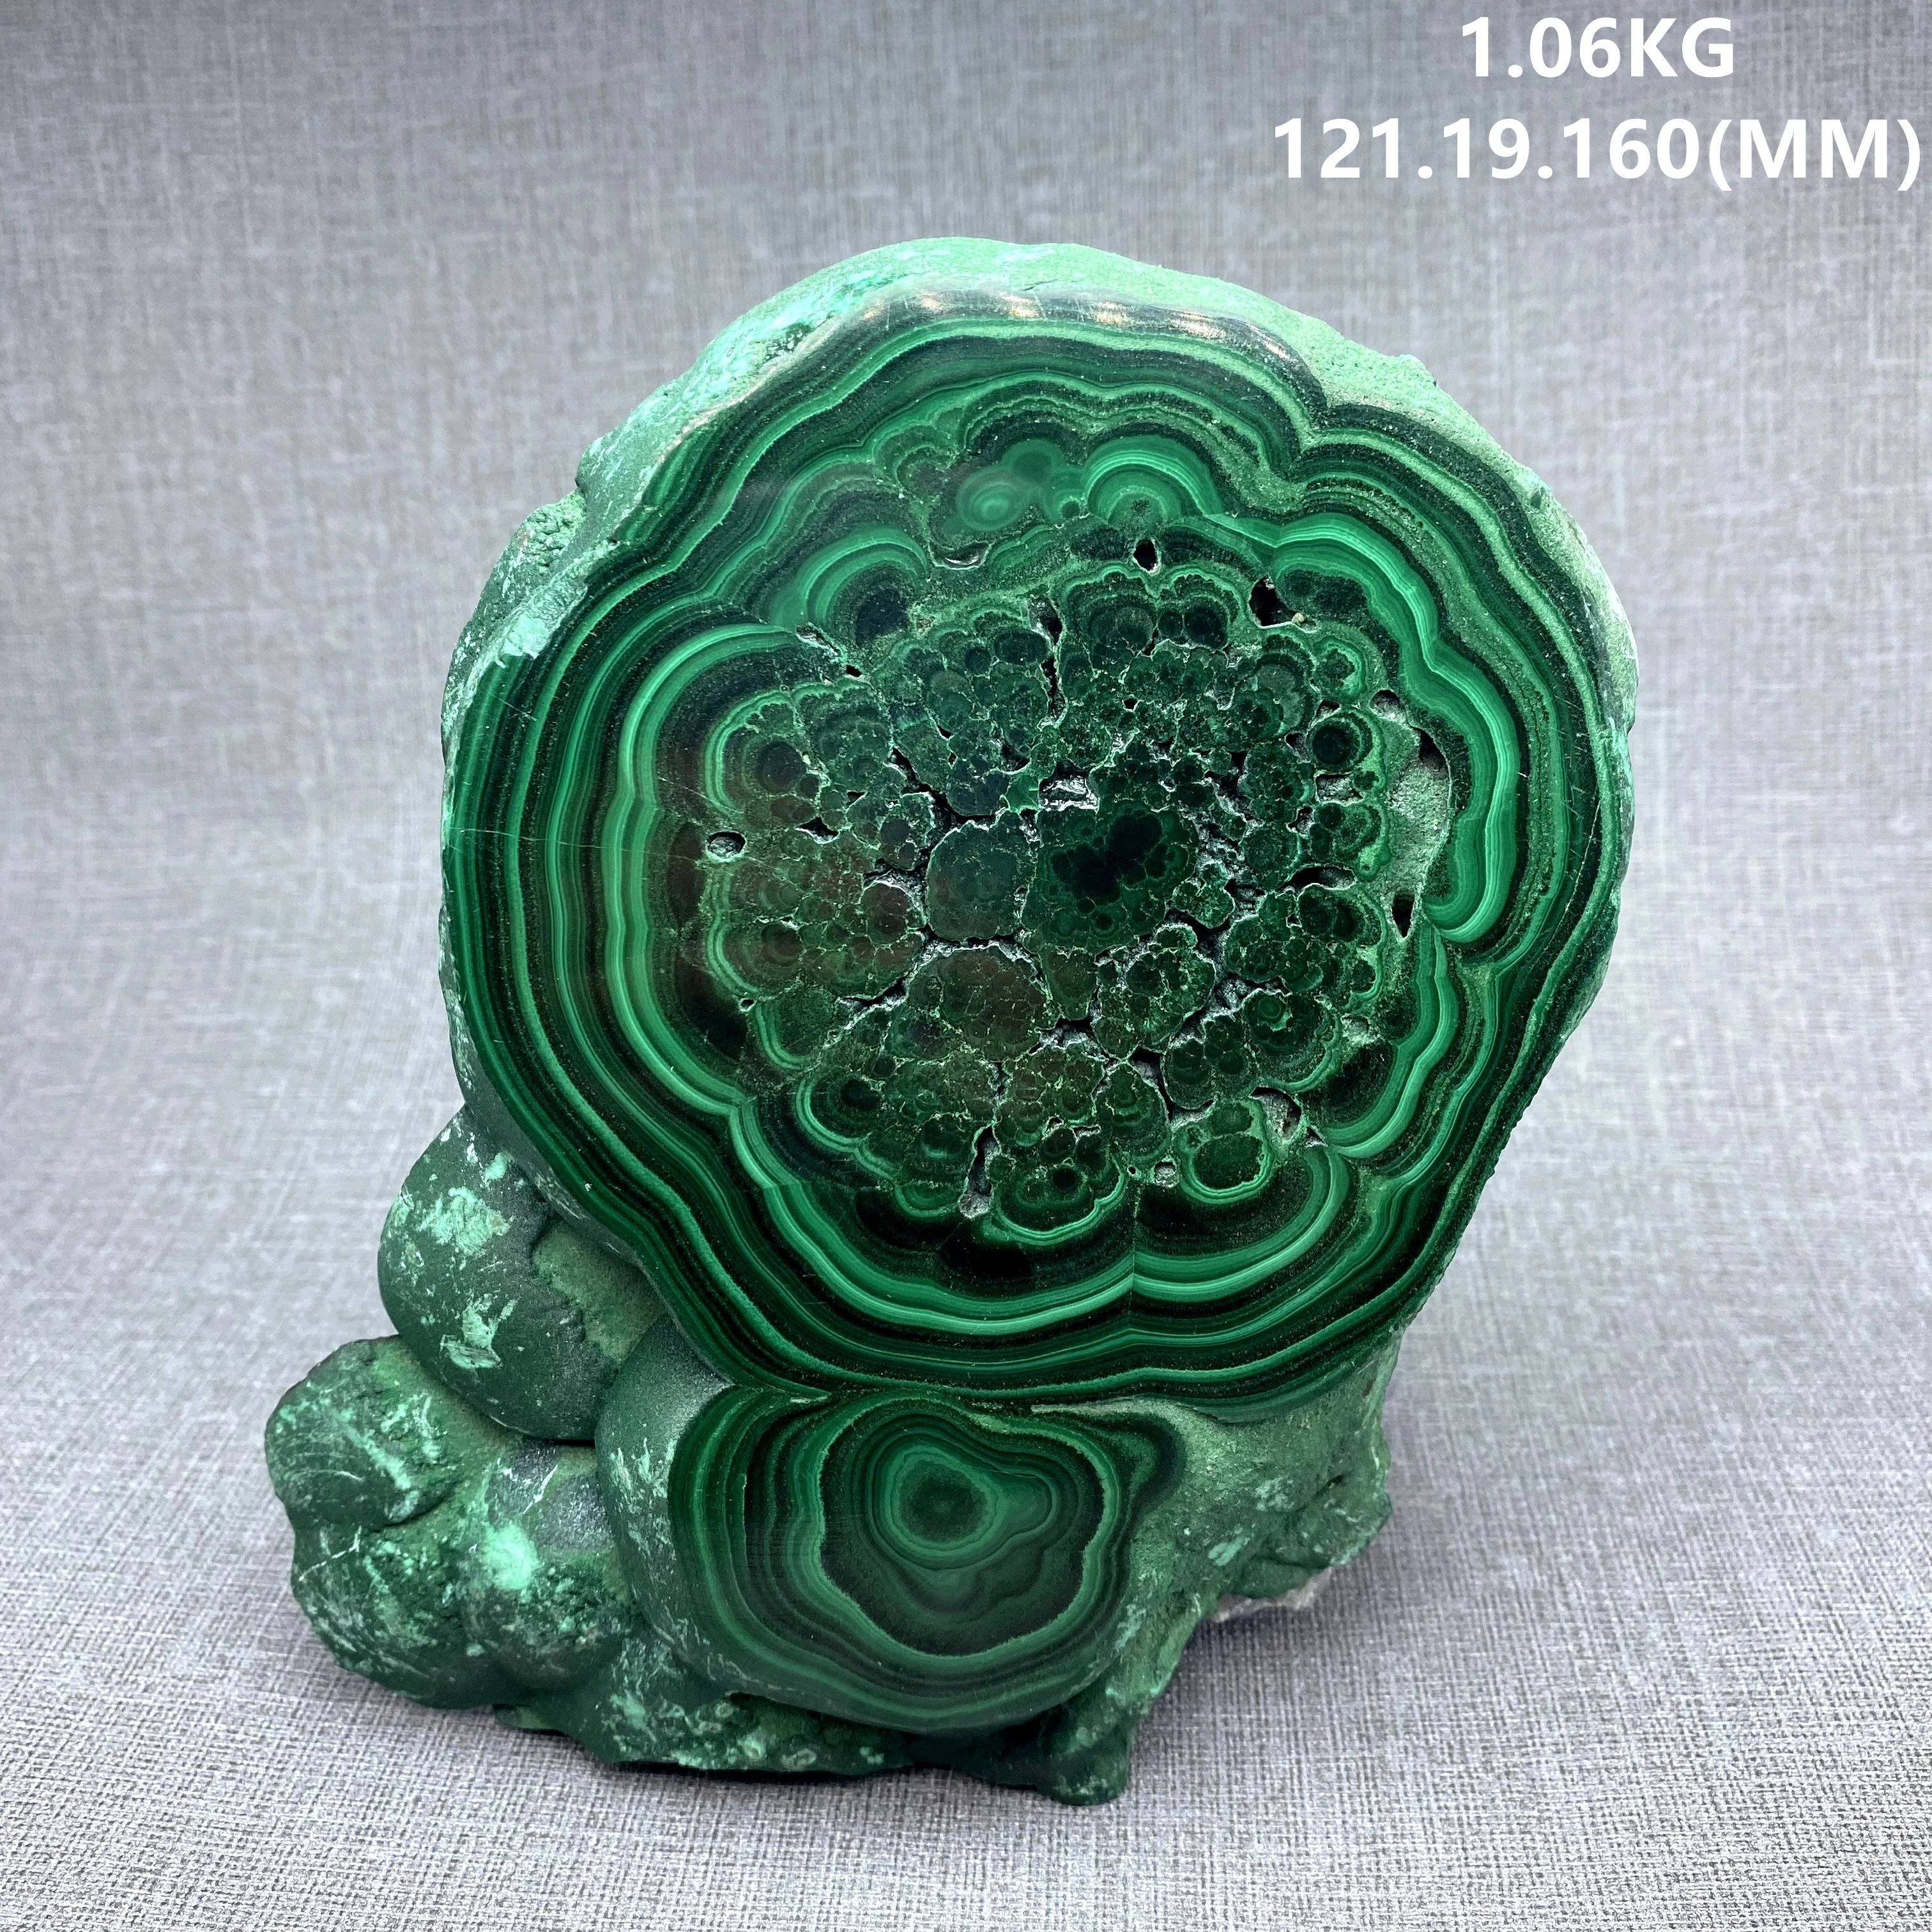 

NEW! BIG! 1062g Natural green malachite polished mineral specimen slice rough stone quartz Stones and crystals Healing crystal